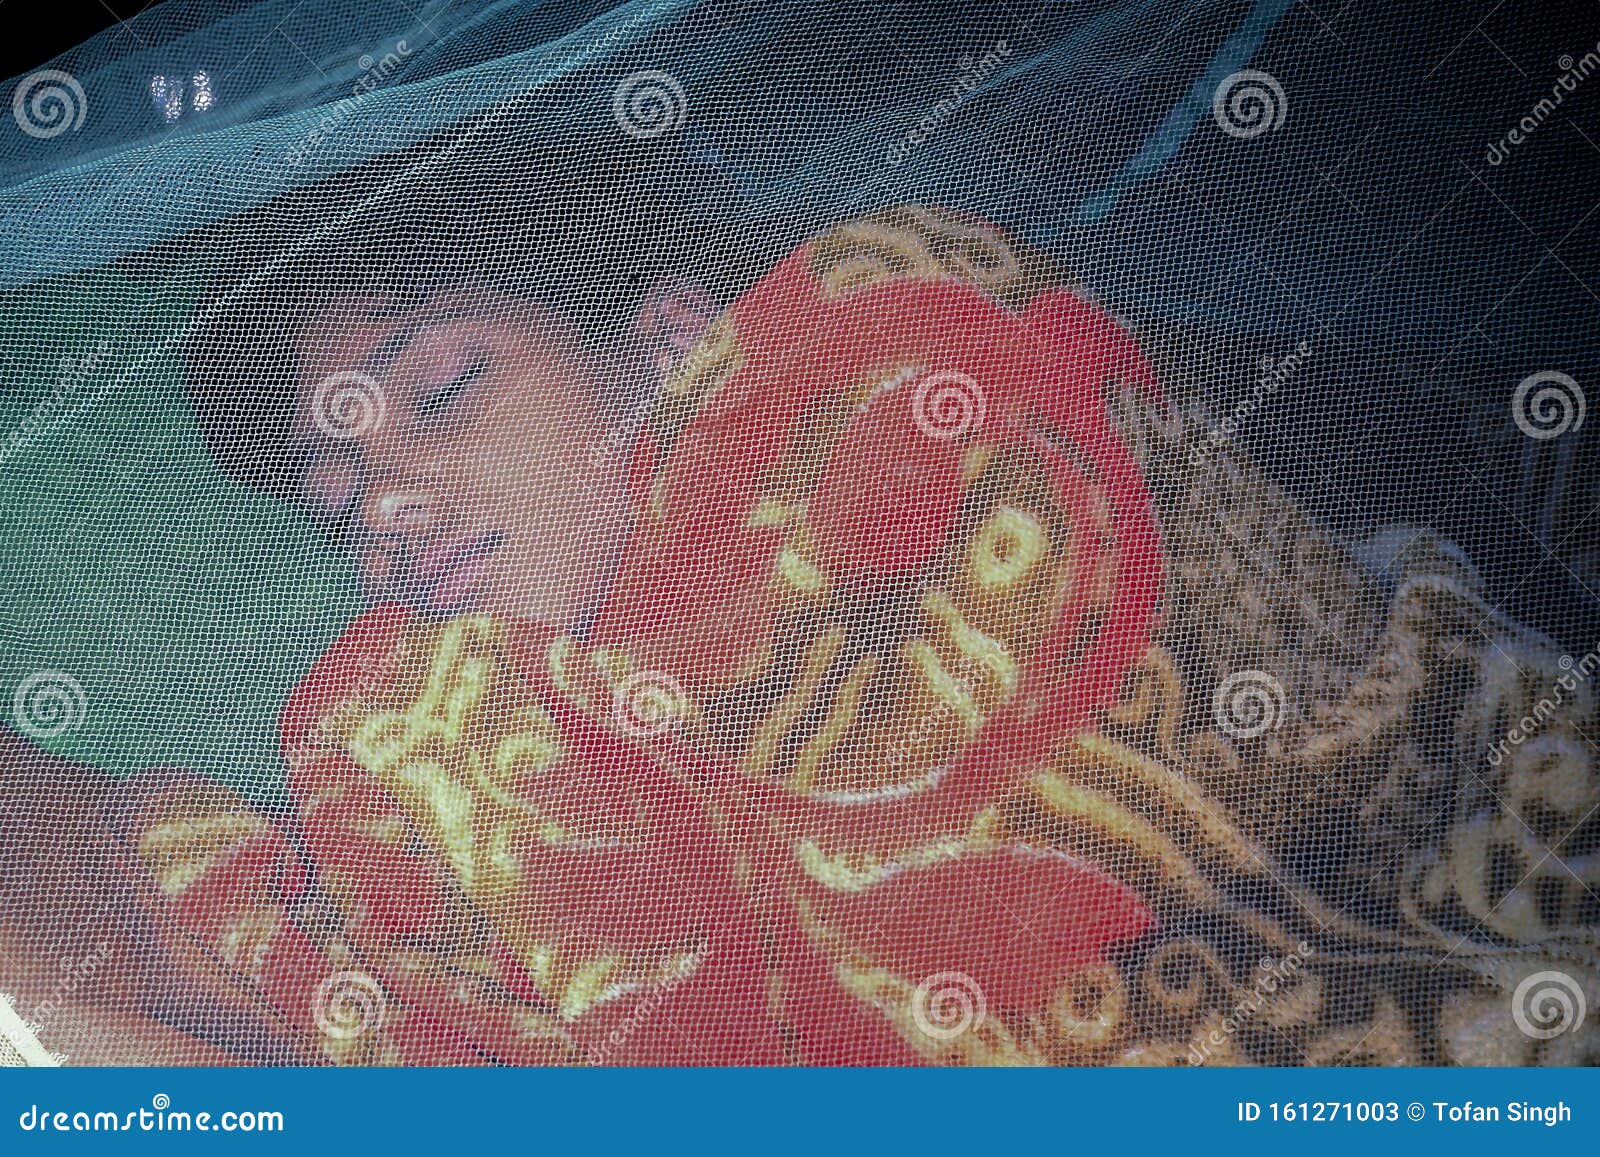 a sleeping boy inside a mosquito net,the safest and easiest way to prevent mosquitoes